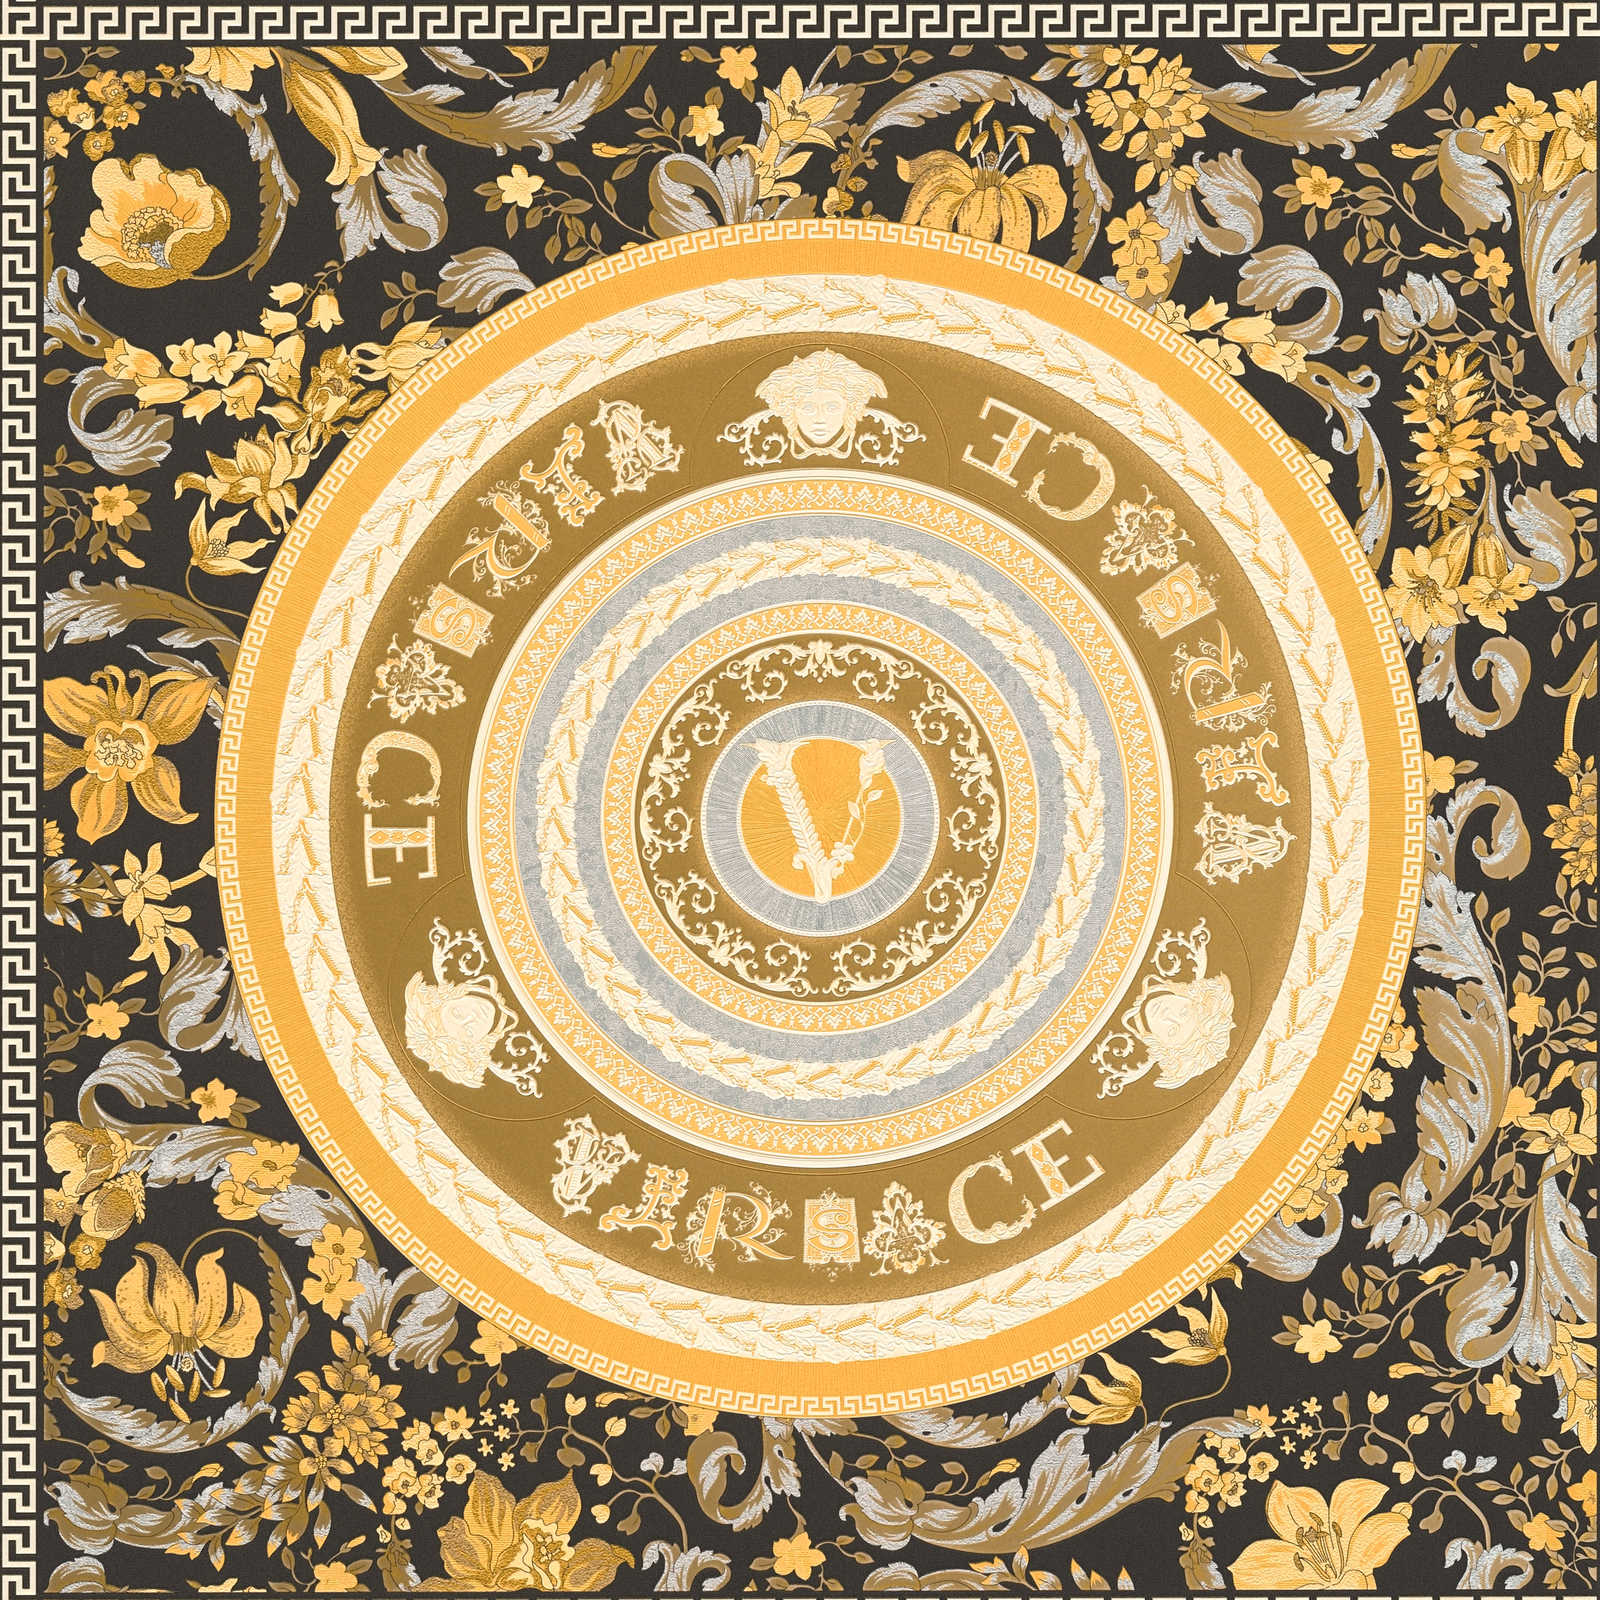         VERSACE wallpaper emblem in gold and silver - black
    